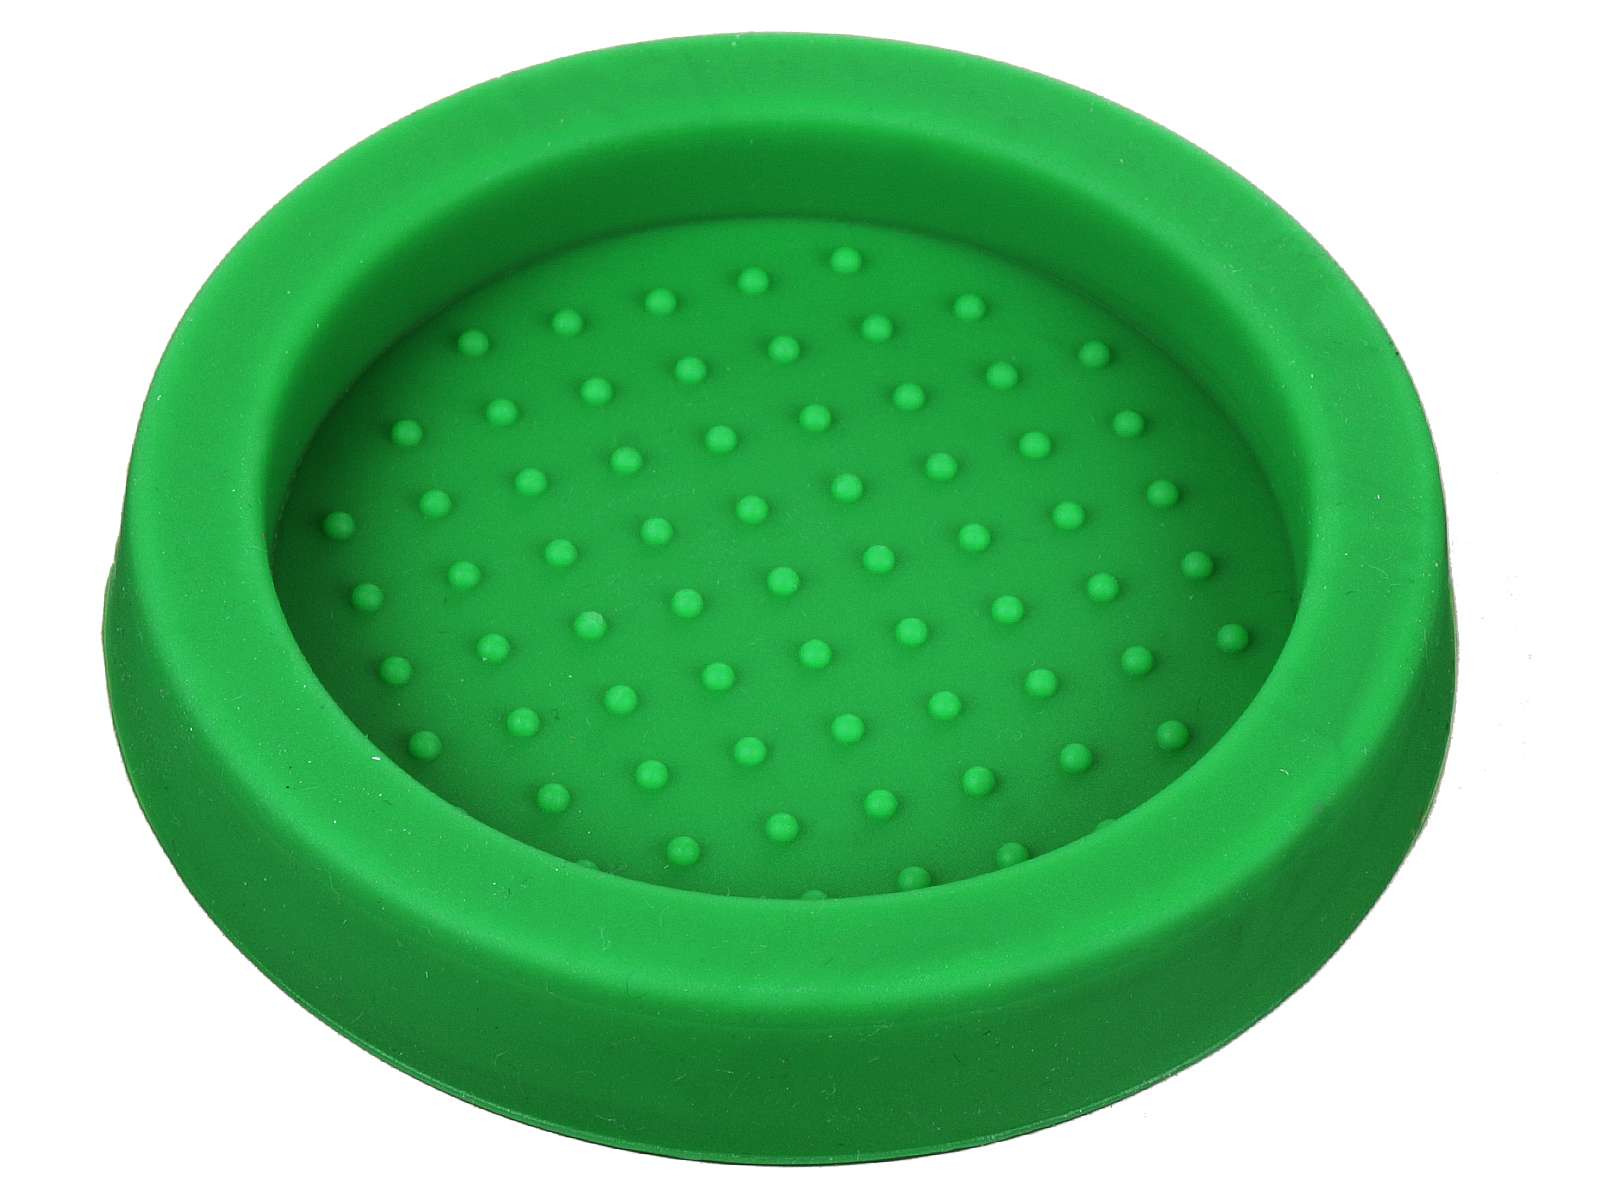 Scarlet espresso tamper tray puck mat made of food-safe silicone for storing the tamper after tamping blue